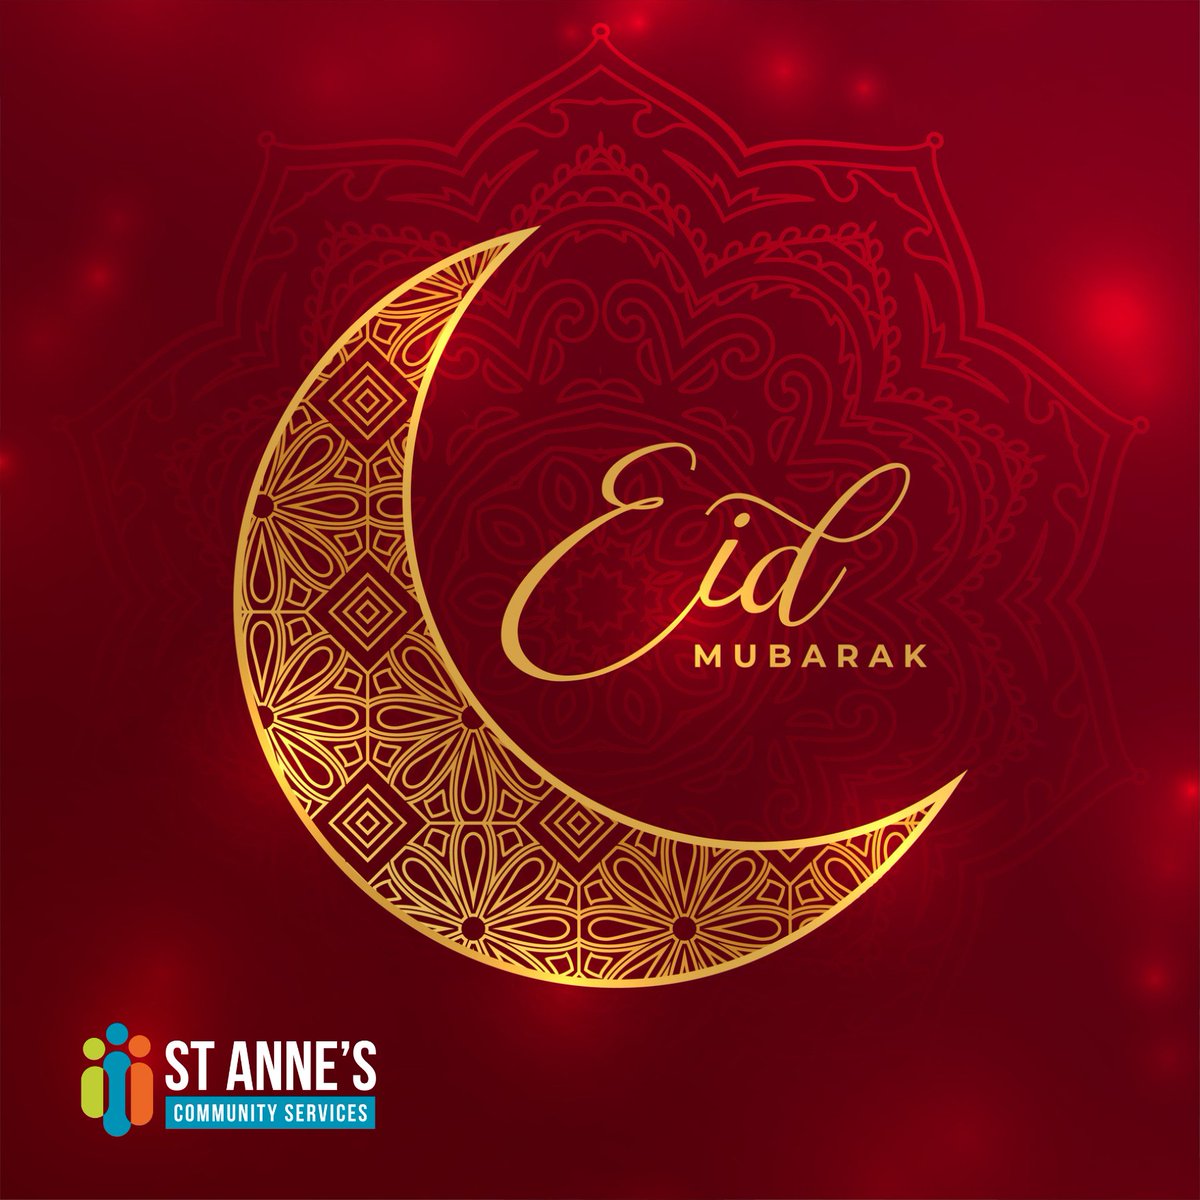 #EidMubarak Happy Eid to everyone. We send you our warmest wishes to all those celebrating the end of #Ramadan with the festival #EidAlFitr #blessings #charity